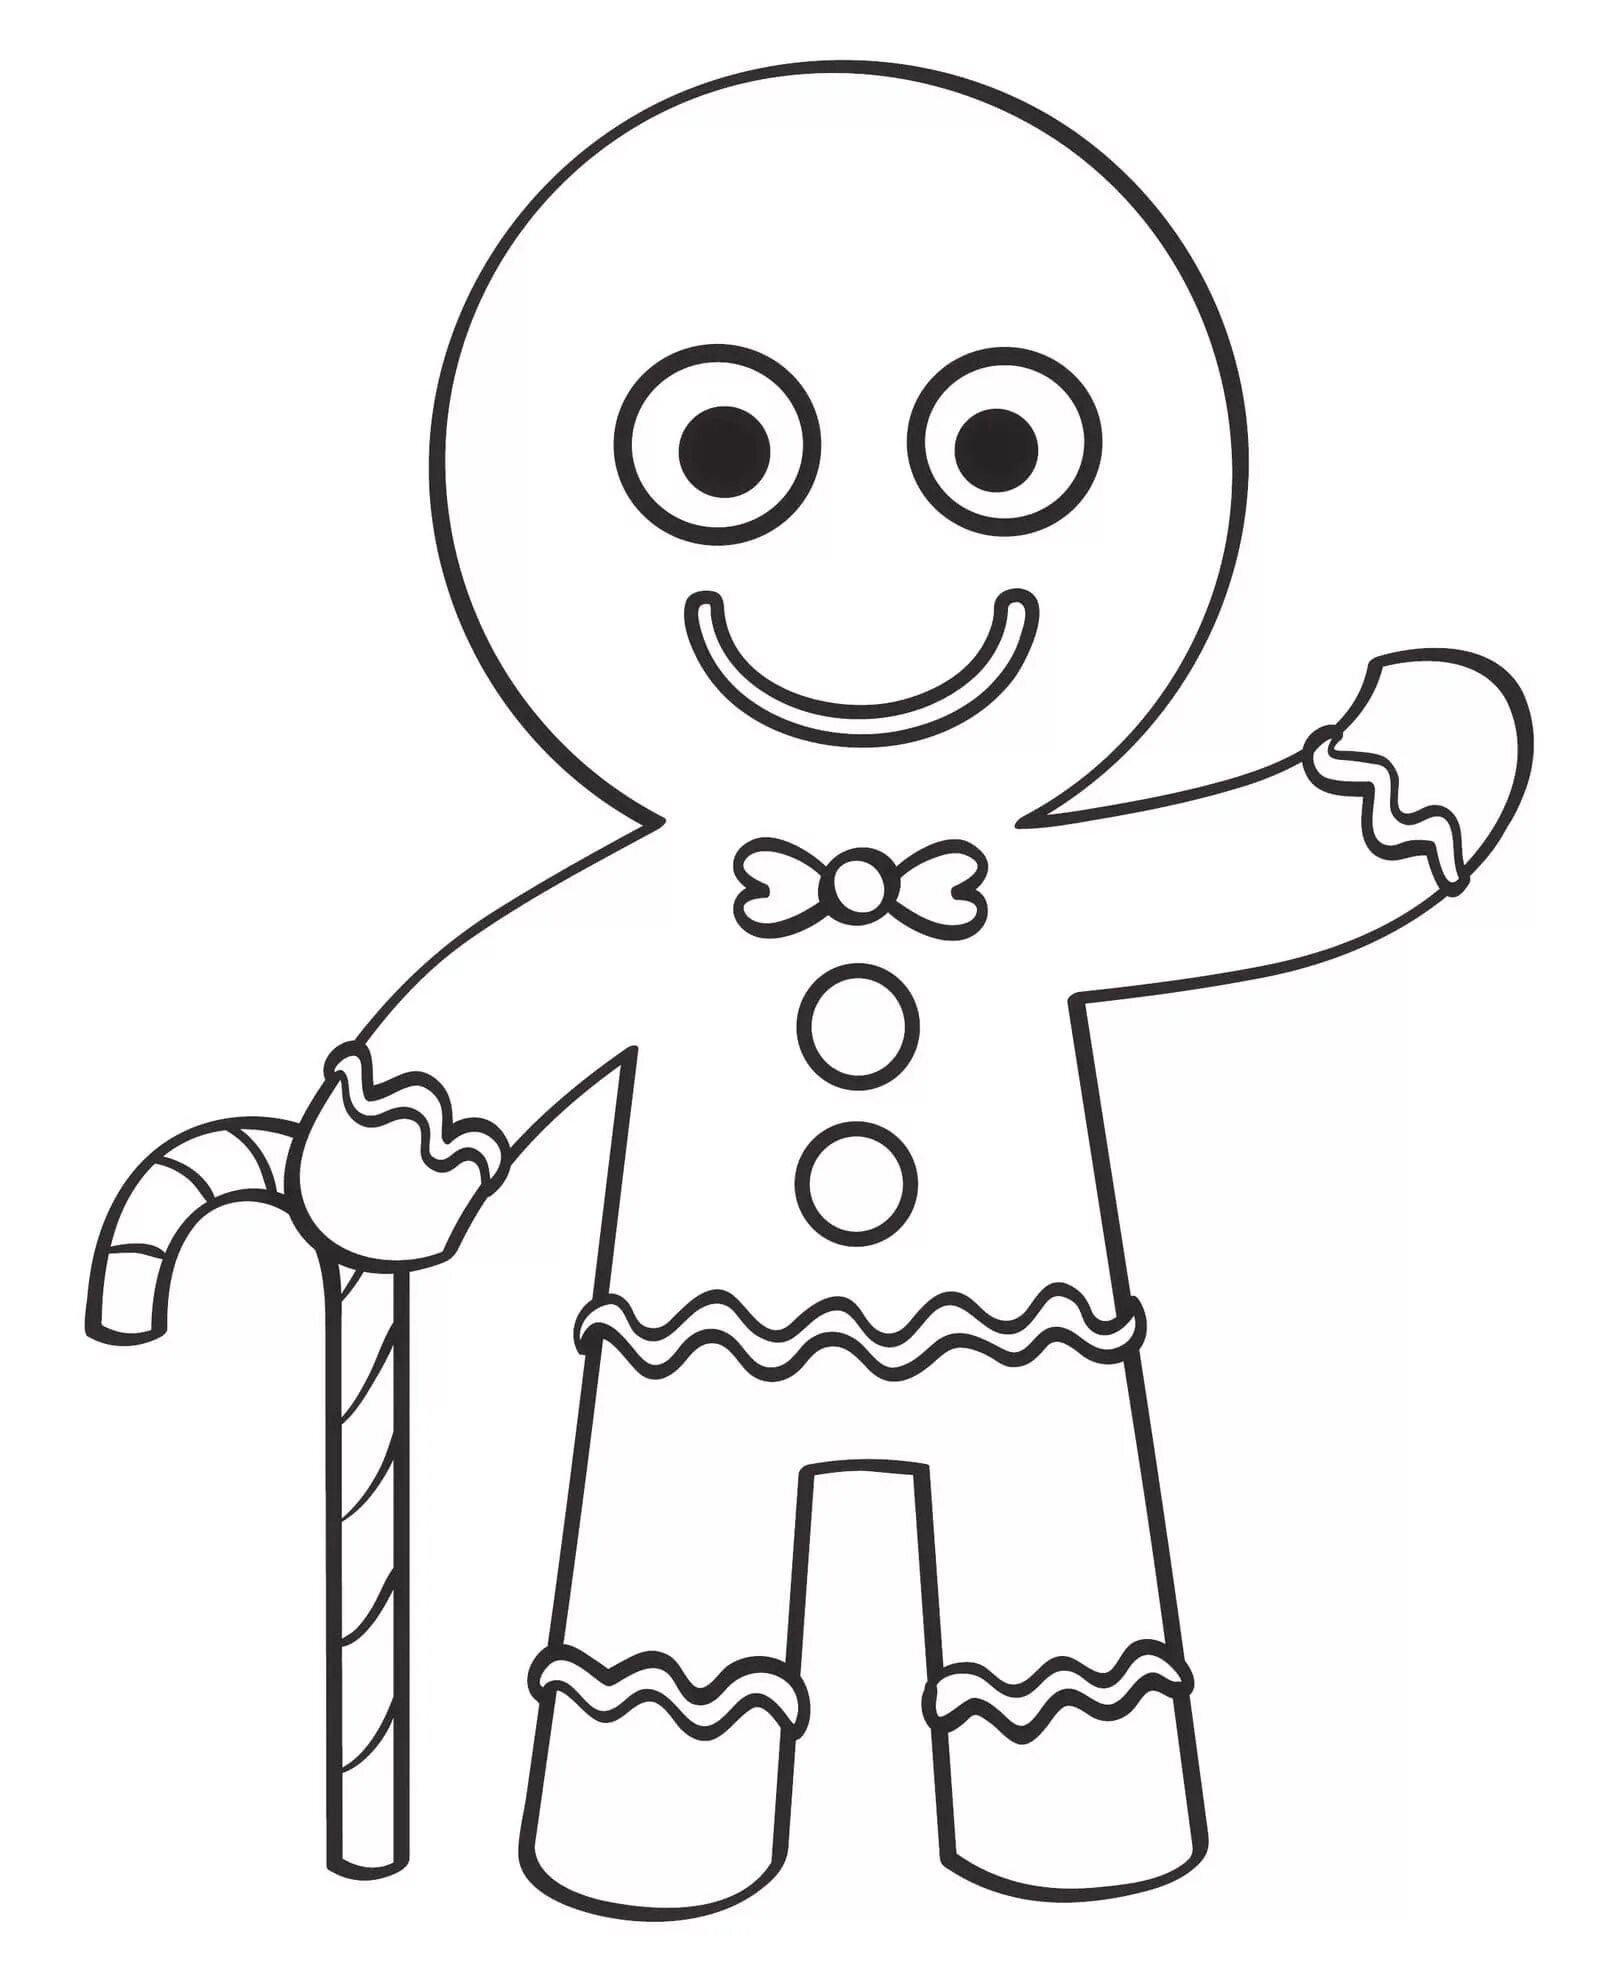 Charming cookie coloring page